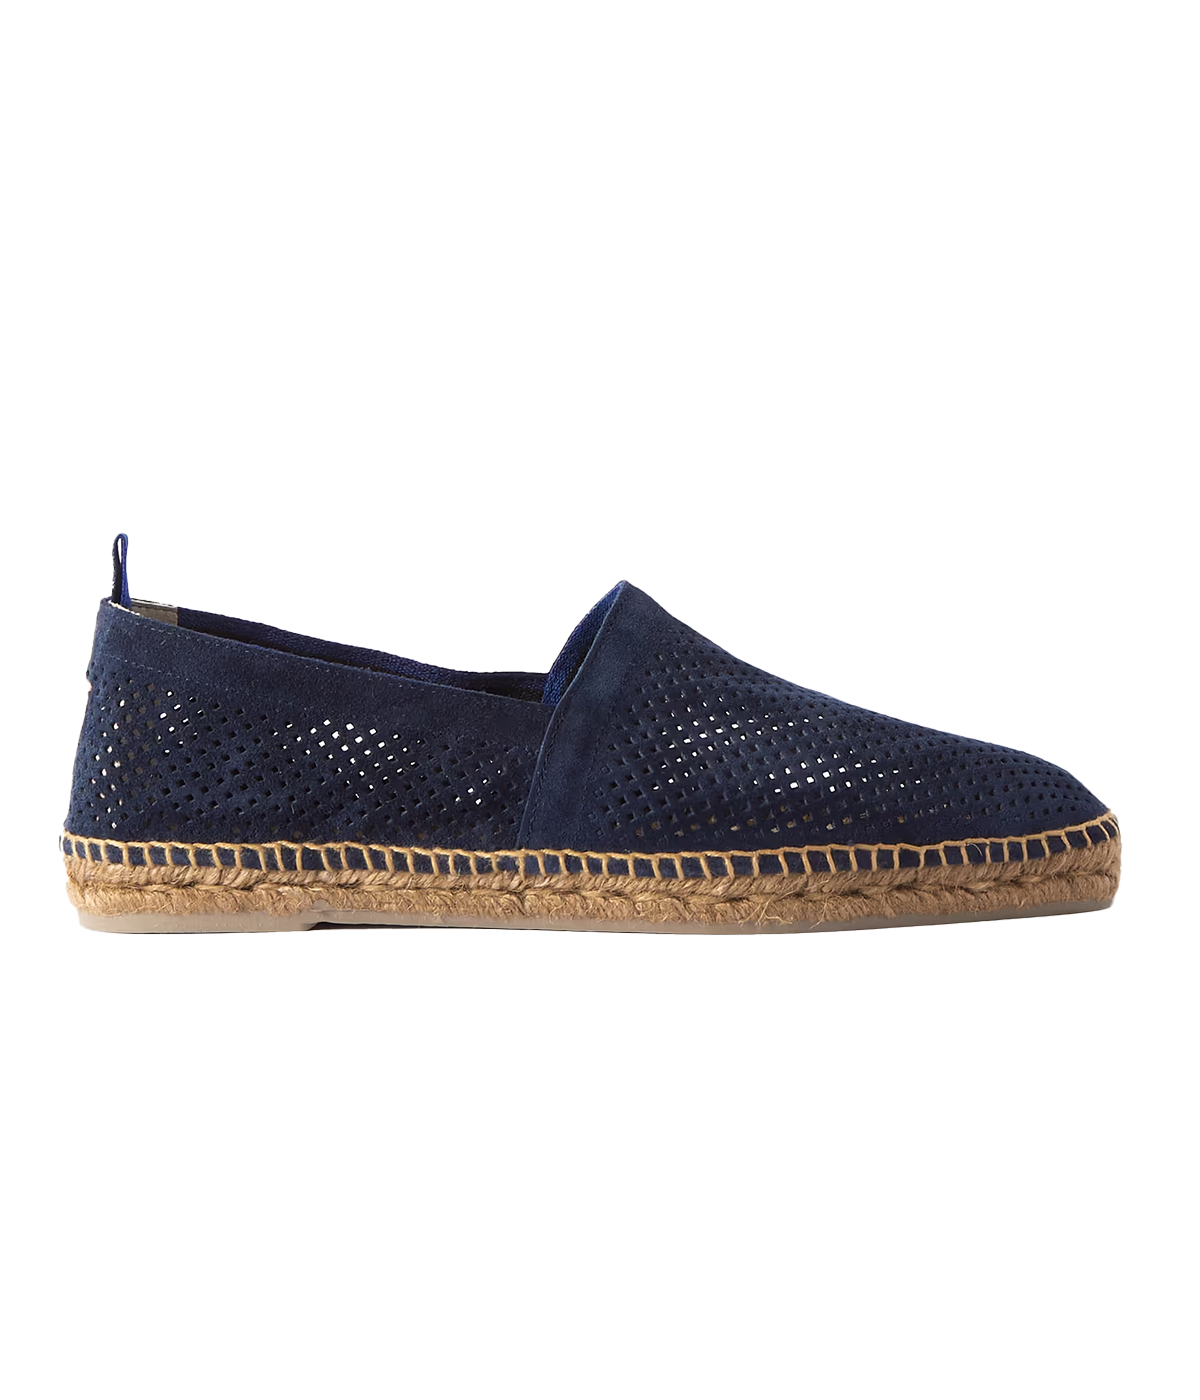 Pablo Perforated Espadrilles in Azul Oscuro